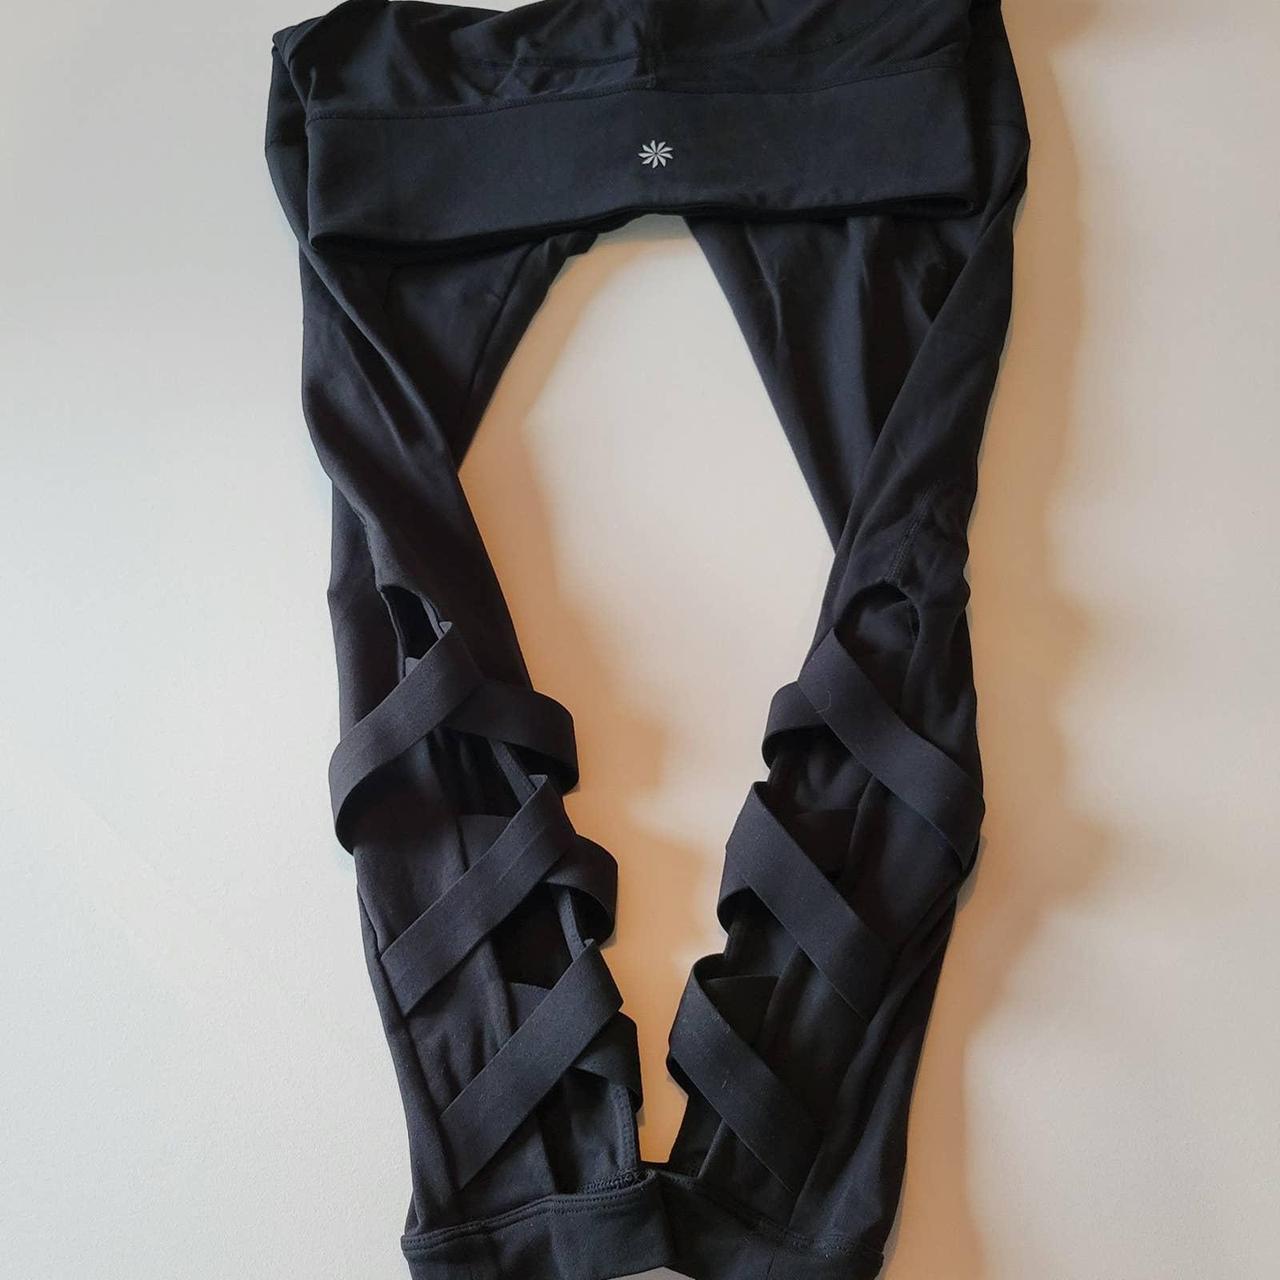 Athleta leggings with criss cross cut out on back of - Depop